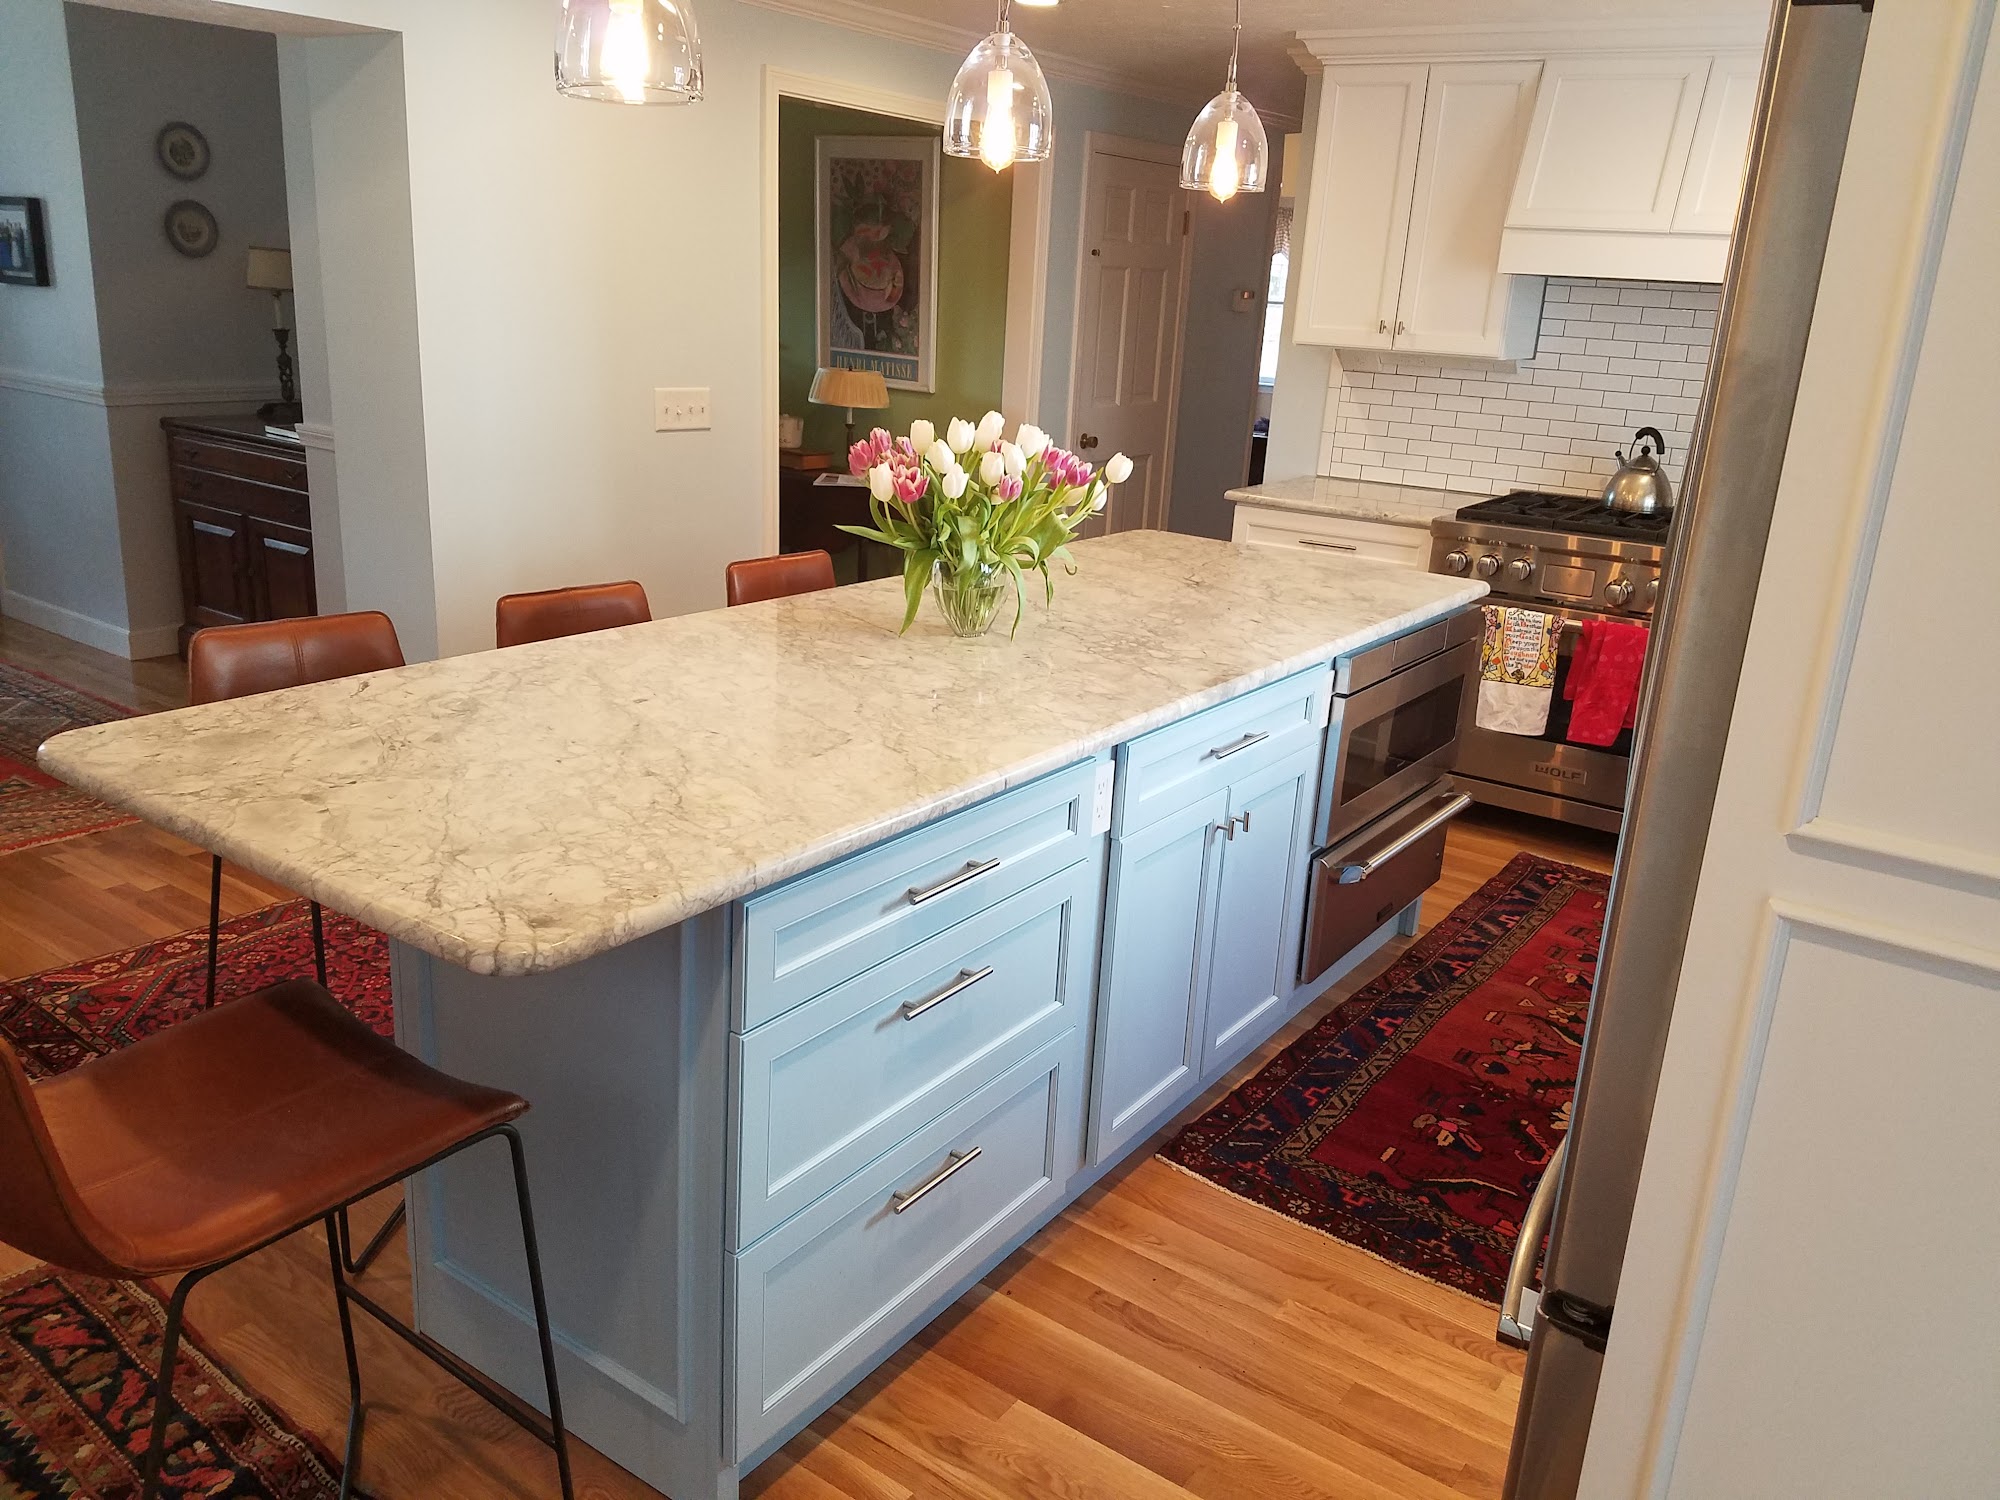 Riversedge Kitchen And Home Design LLC 132 Great Rd, Stow Massachusetts 01775